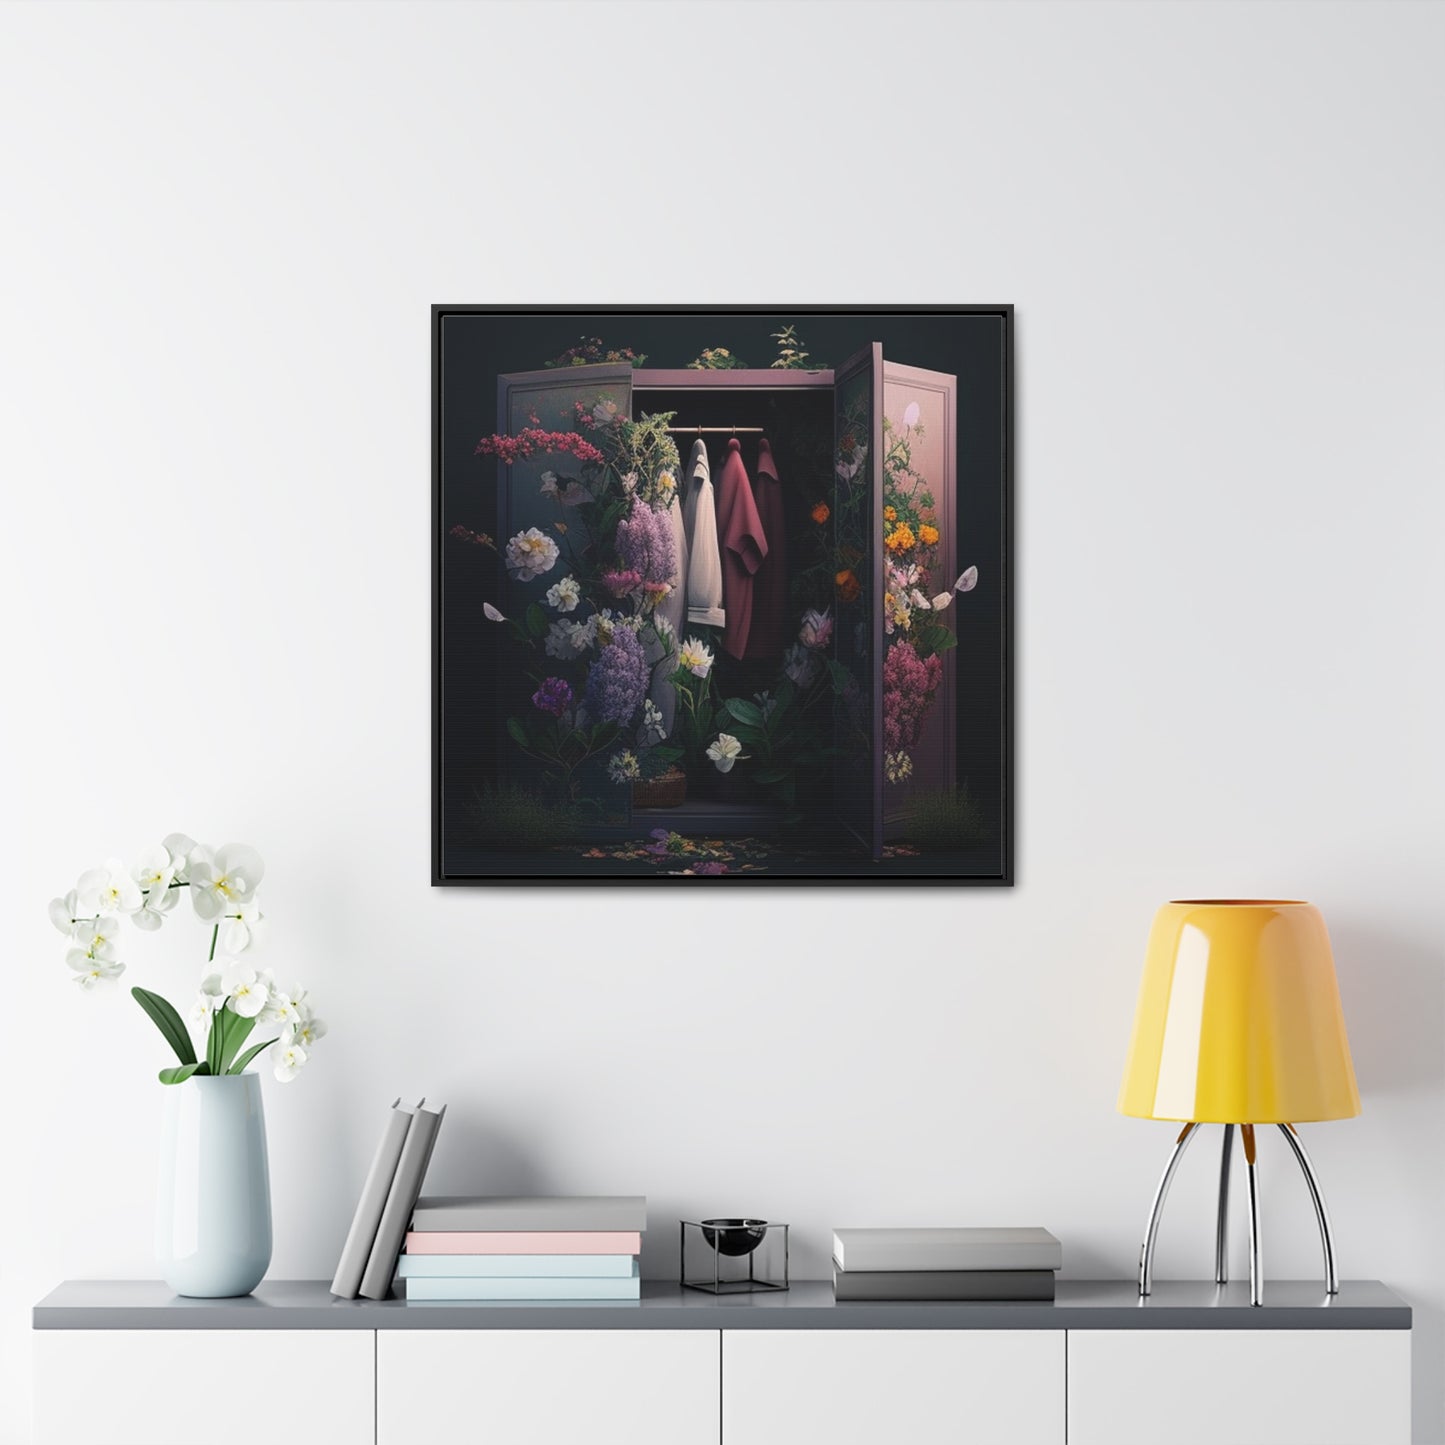 Gallery Canvas Wraps, Square Frame A Wardrobe Surrounded by Flowers 2